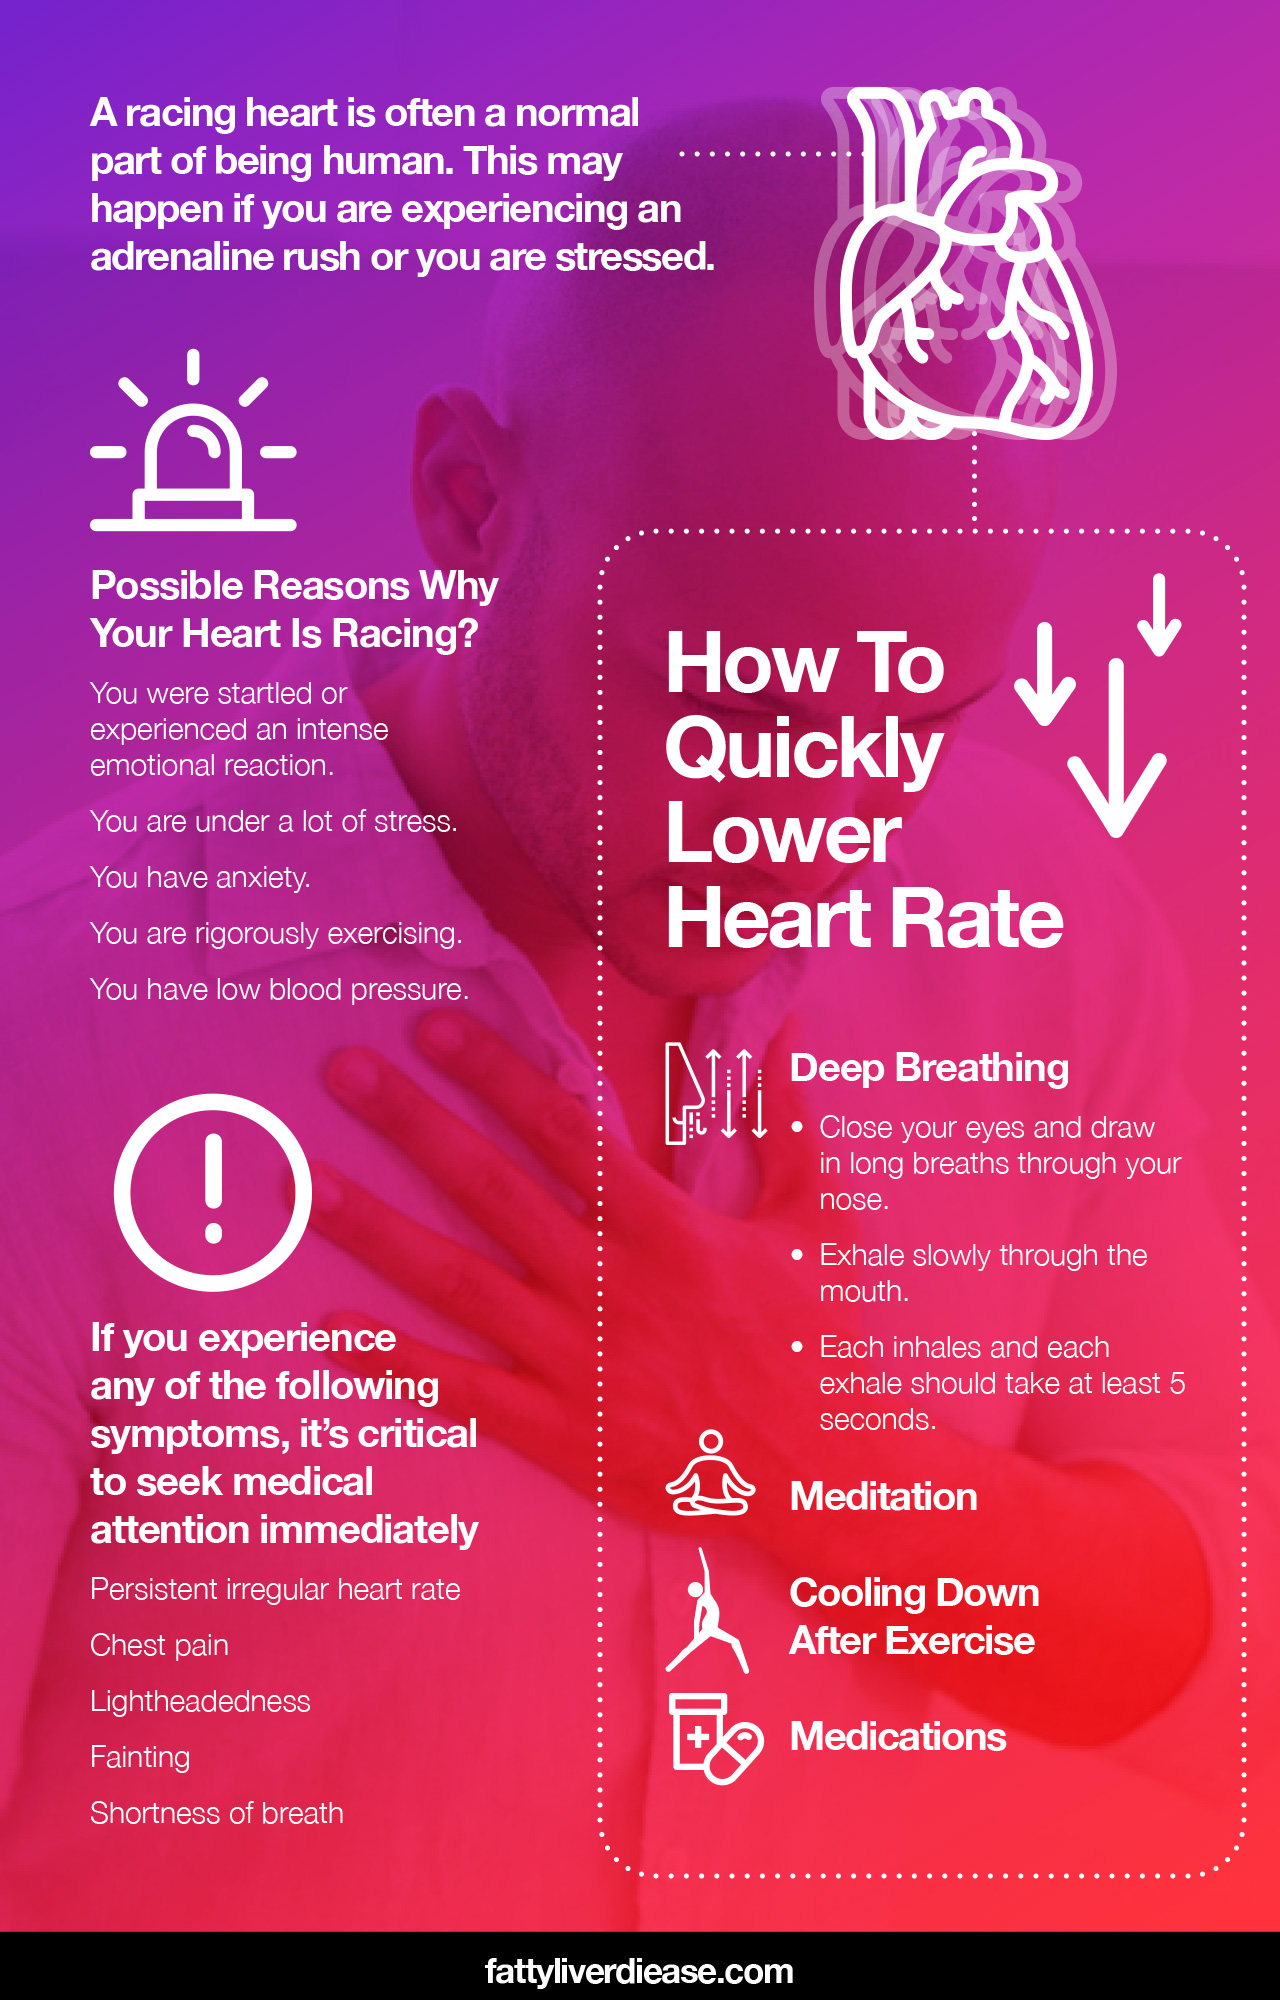 Possible Reasons Why Your Heart Is Racing?